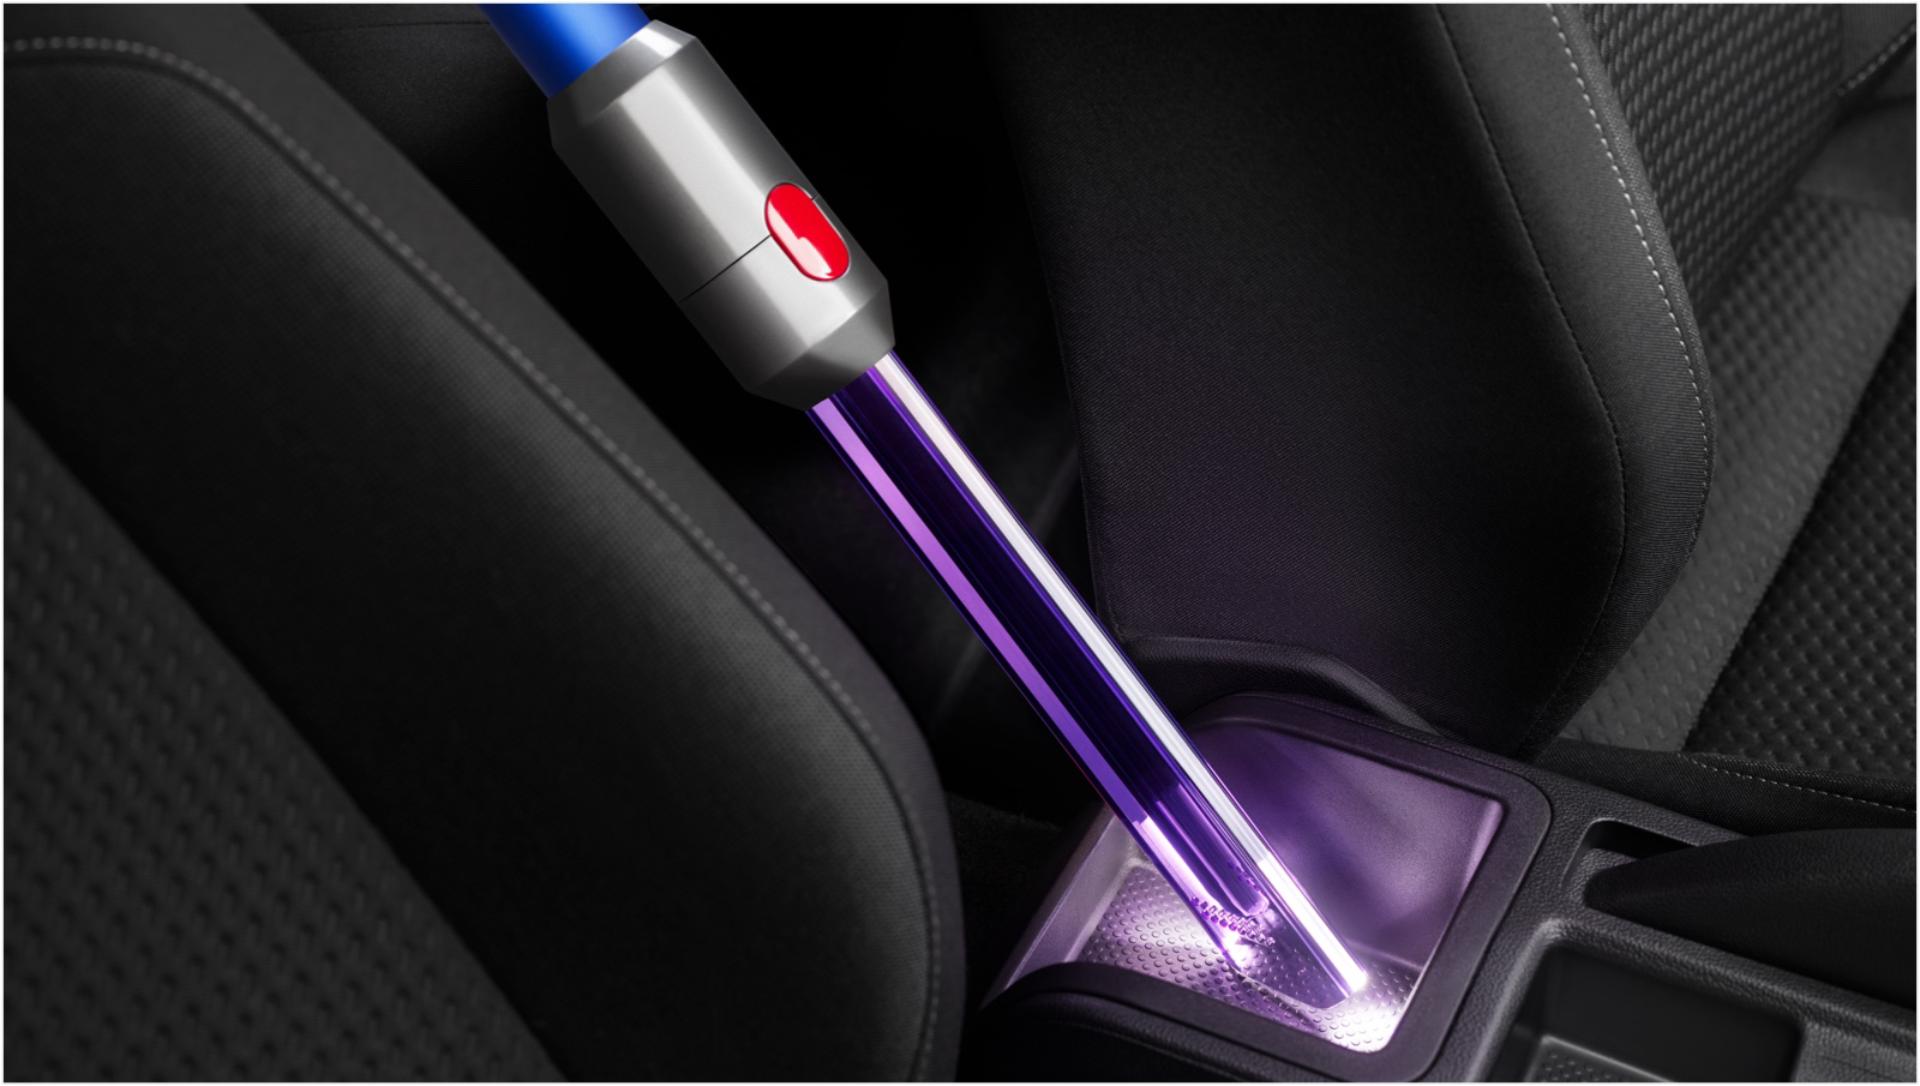 Light pipe crevice tool cleaning a dark car interior